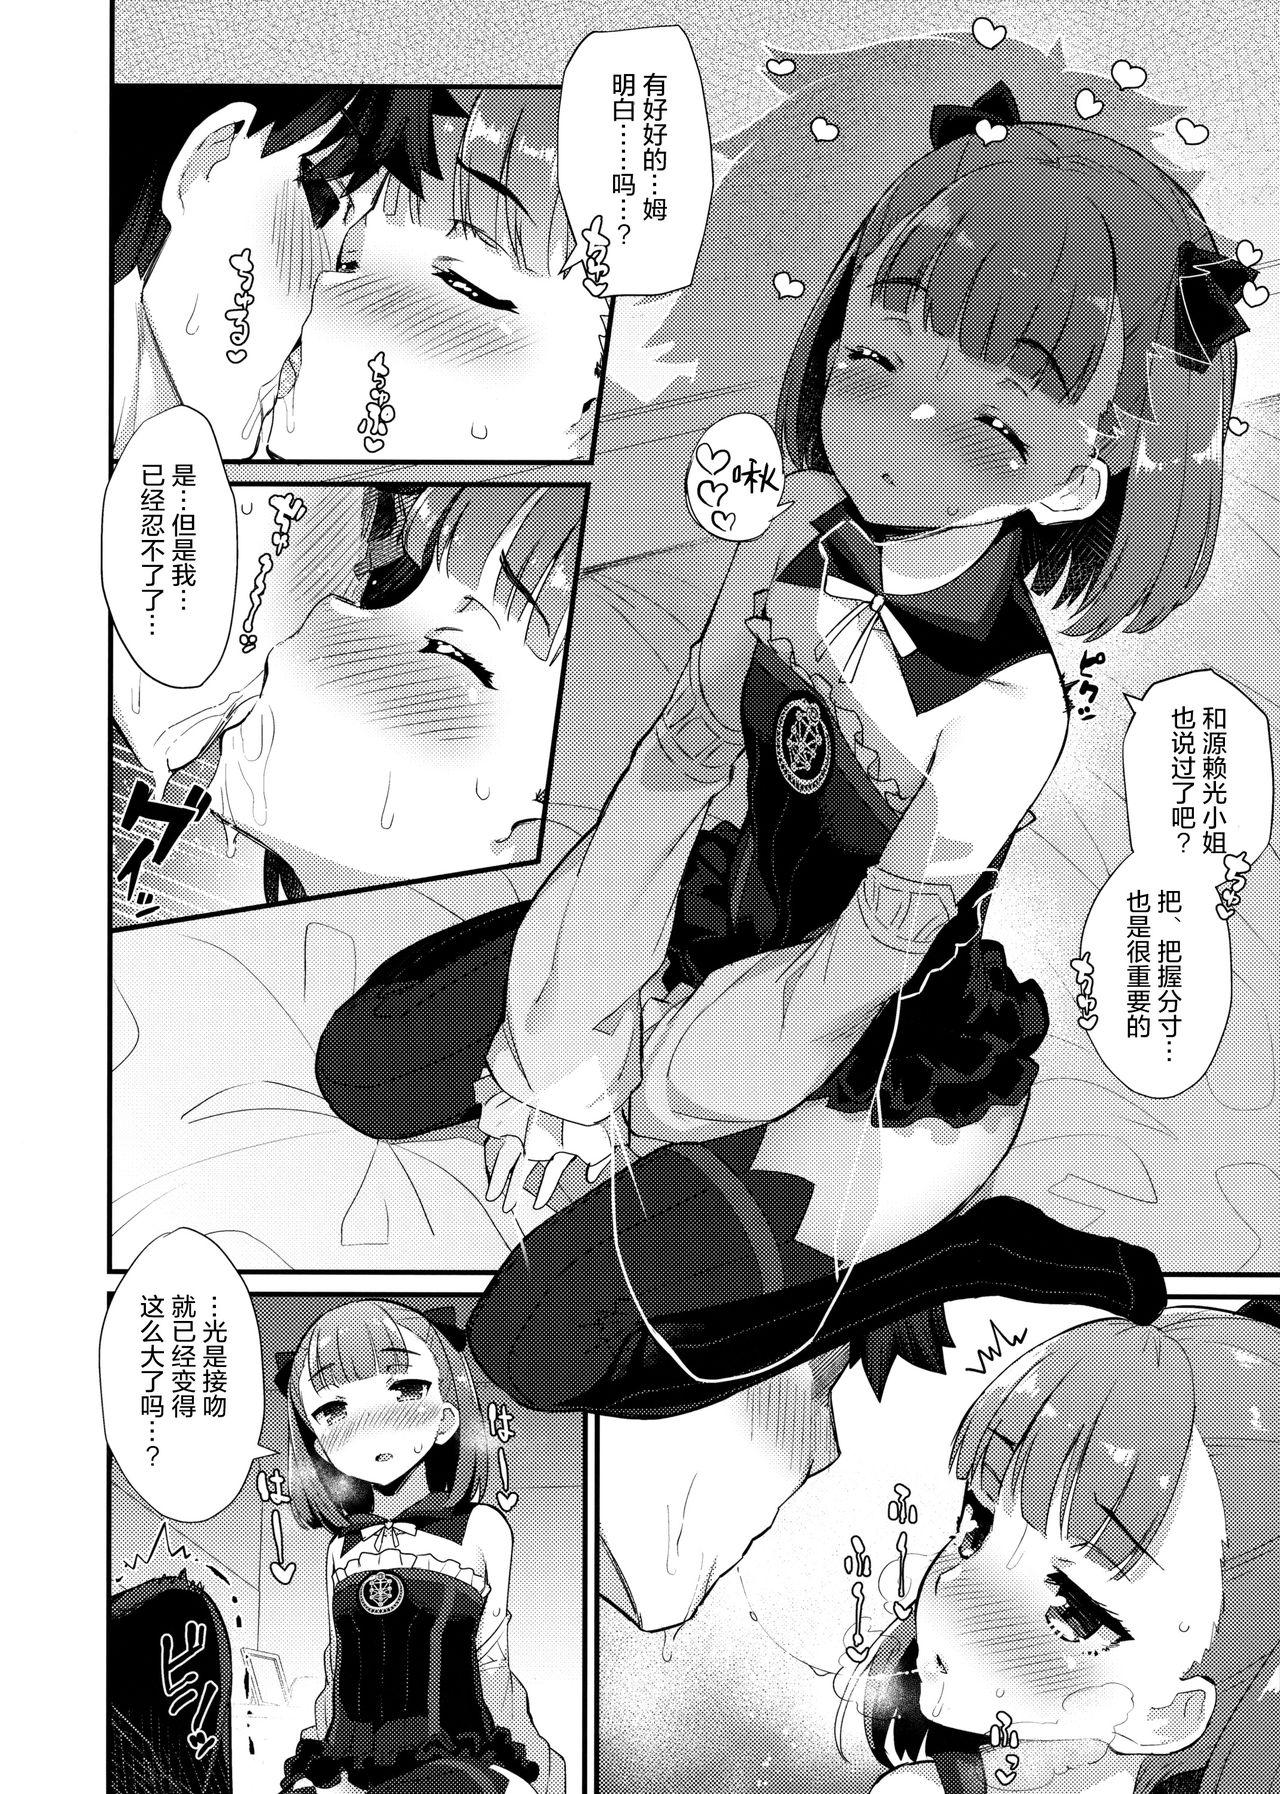 Freaky Helena Order - Fate grand order Dorm - Page 6